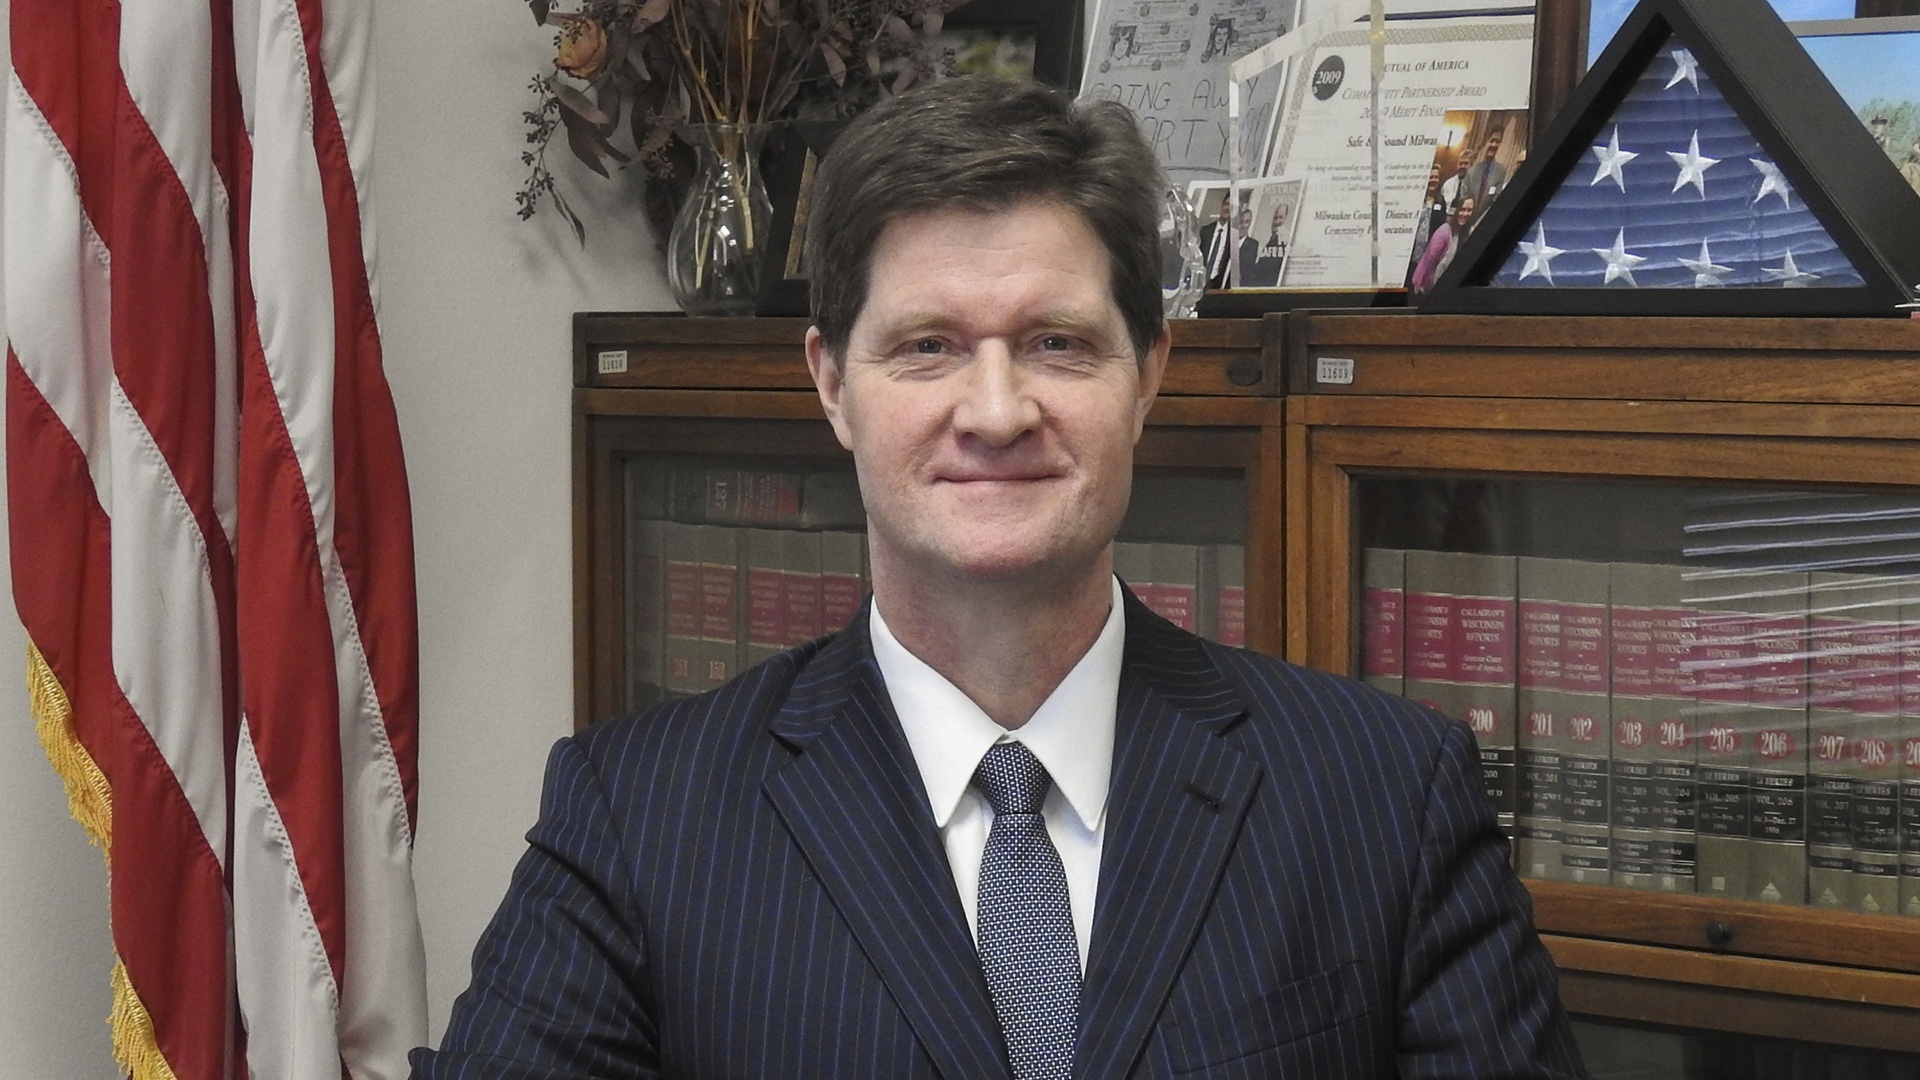 John Chisholm sits in an office with legal books in a cabinet, flags and other items in the background.